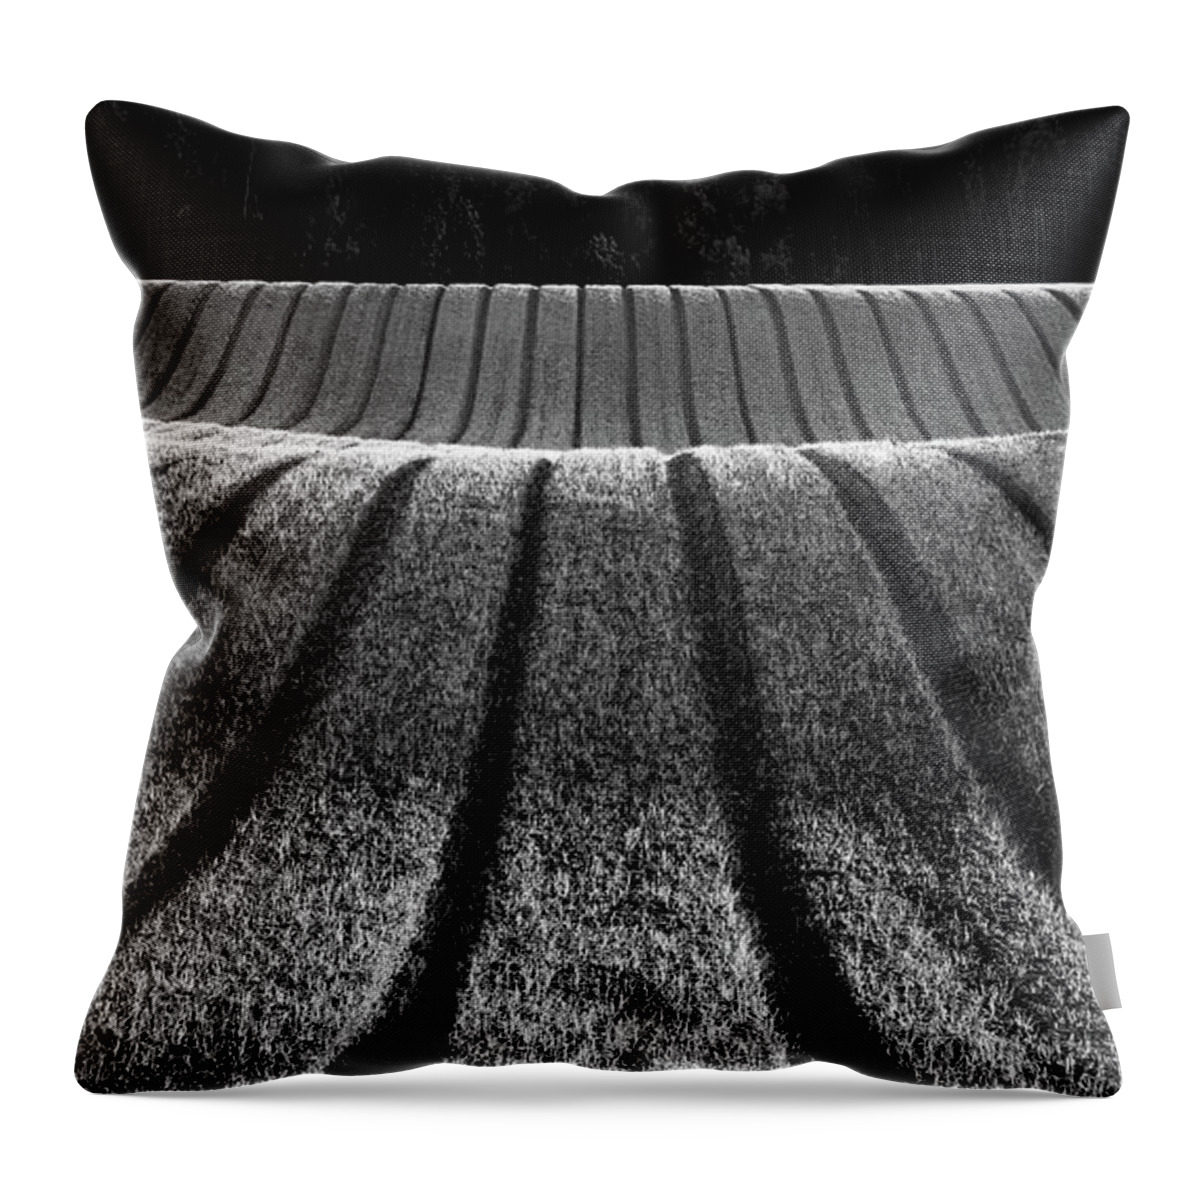 Abstract Throw Pillow featuring the photograph Graphic Farming by Manpreet Sokhi